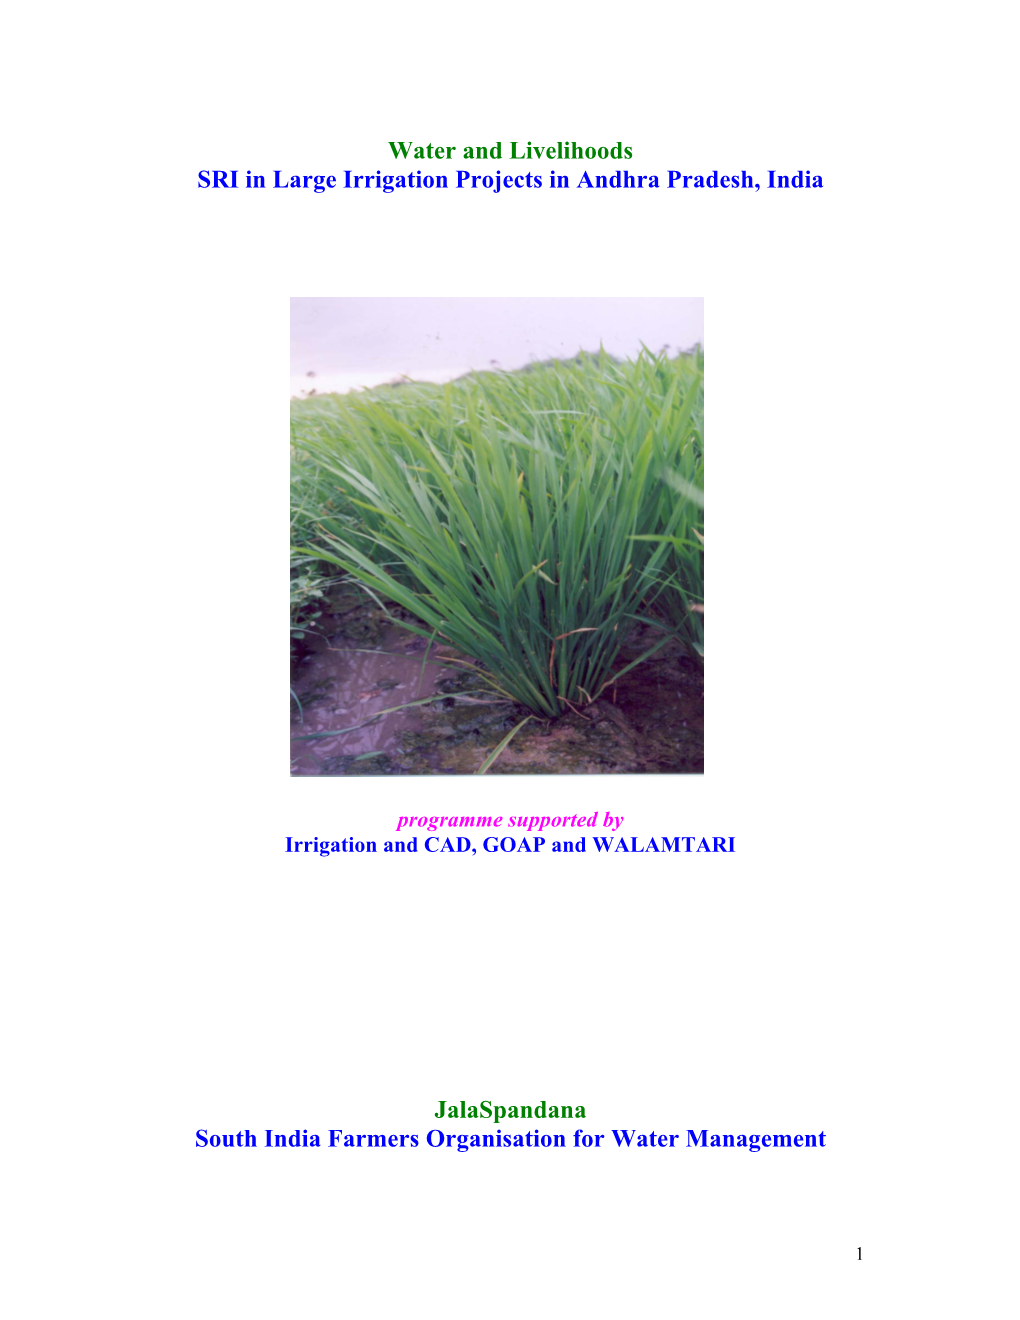 SRI in Large Irrigation Projects in Andhra Pradesh, India